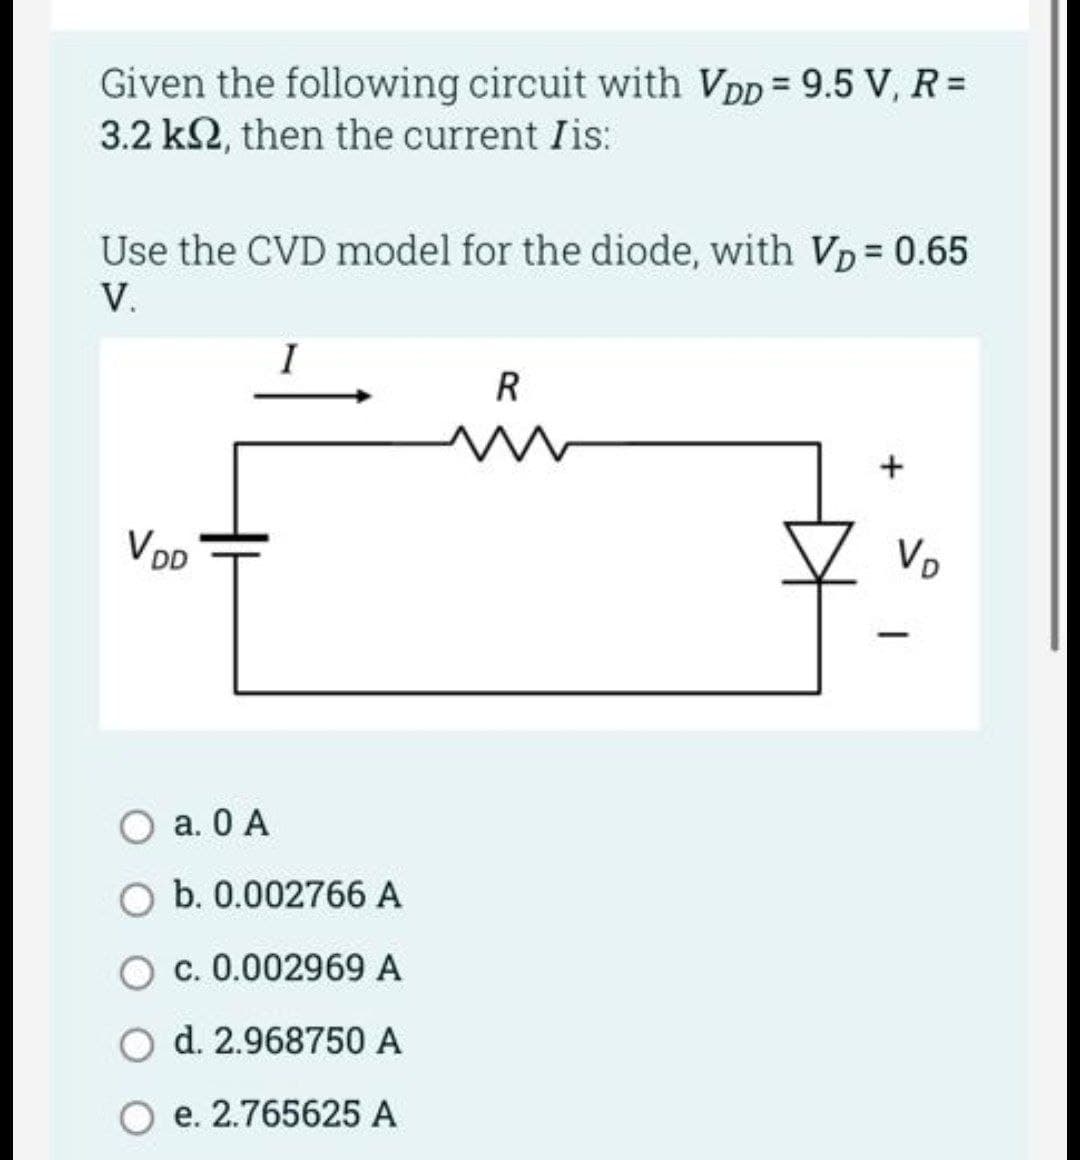 Given the following circuit with VDD = 9.5 V, R =
3.2 k2, then the current Iis:
Use the CVD model for the diode, with VD = 0.65
V.
VDD
I
a. 0 A
O b. 0.002766 A
c. 0.002969 A
d. 2.968750 A
e. 2.765625 A
R
N
V₂